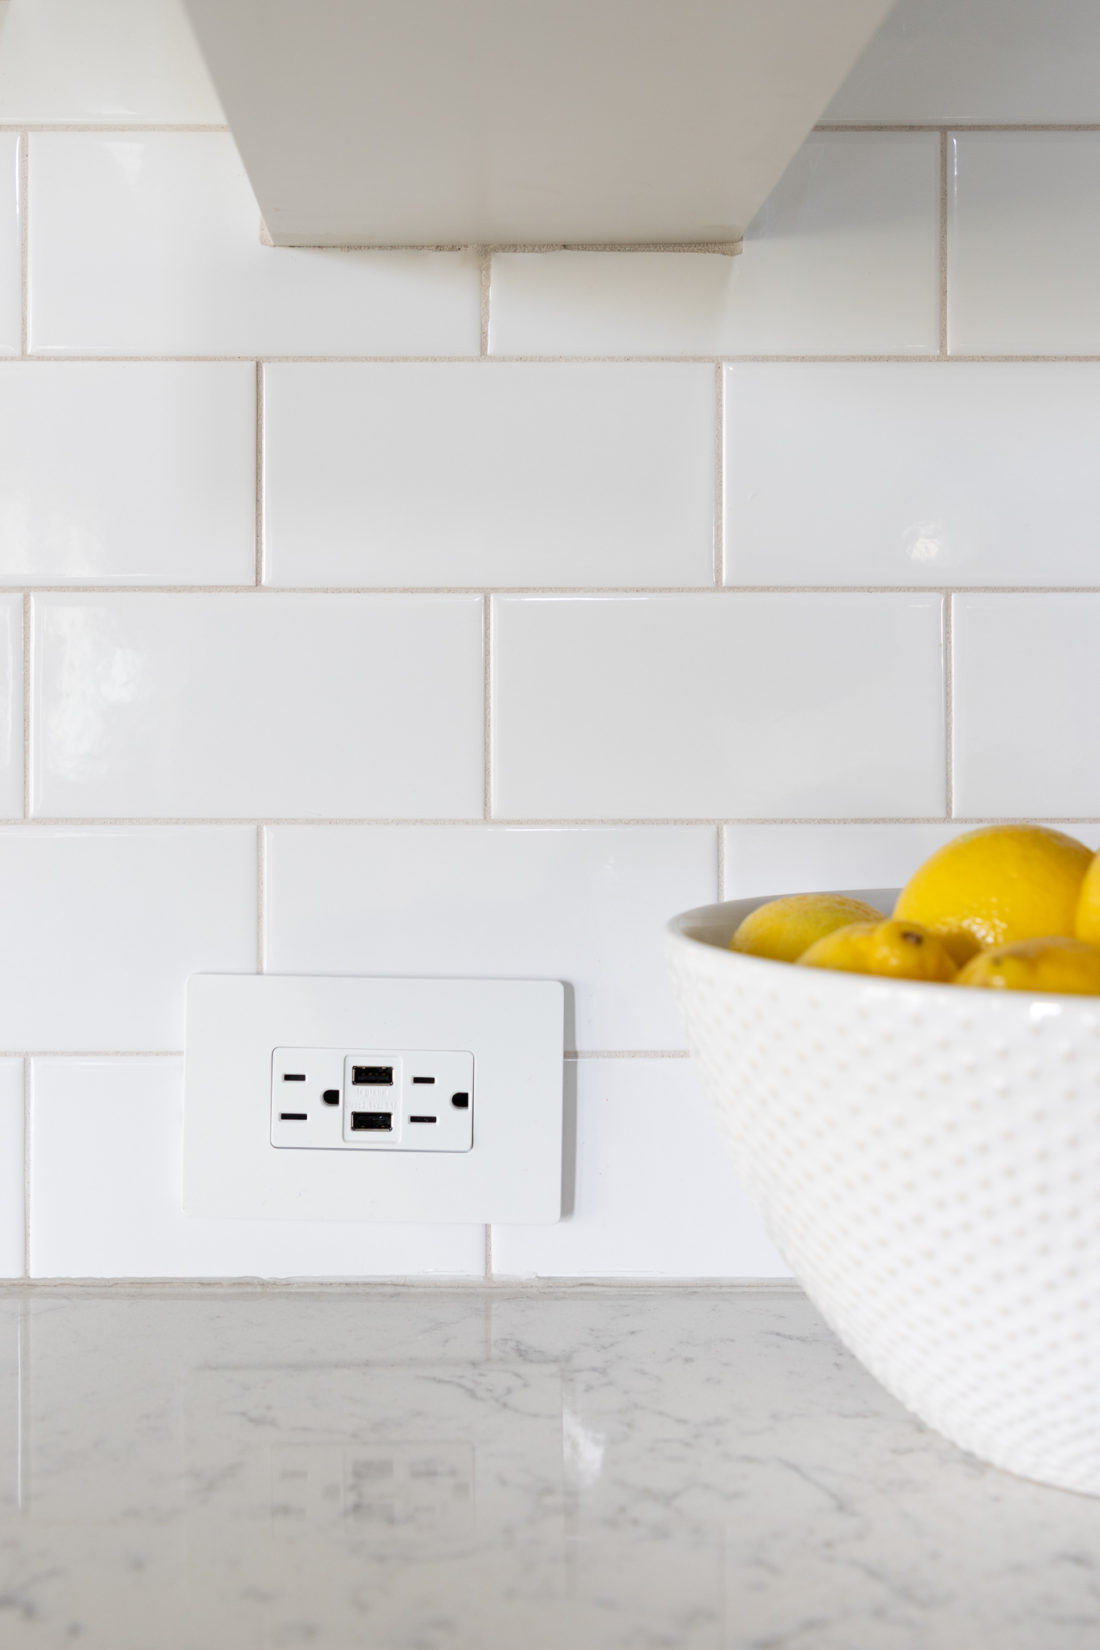 Legrand electrical outlet with USB ports